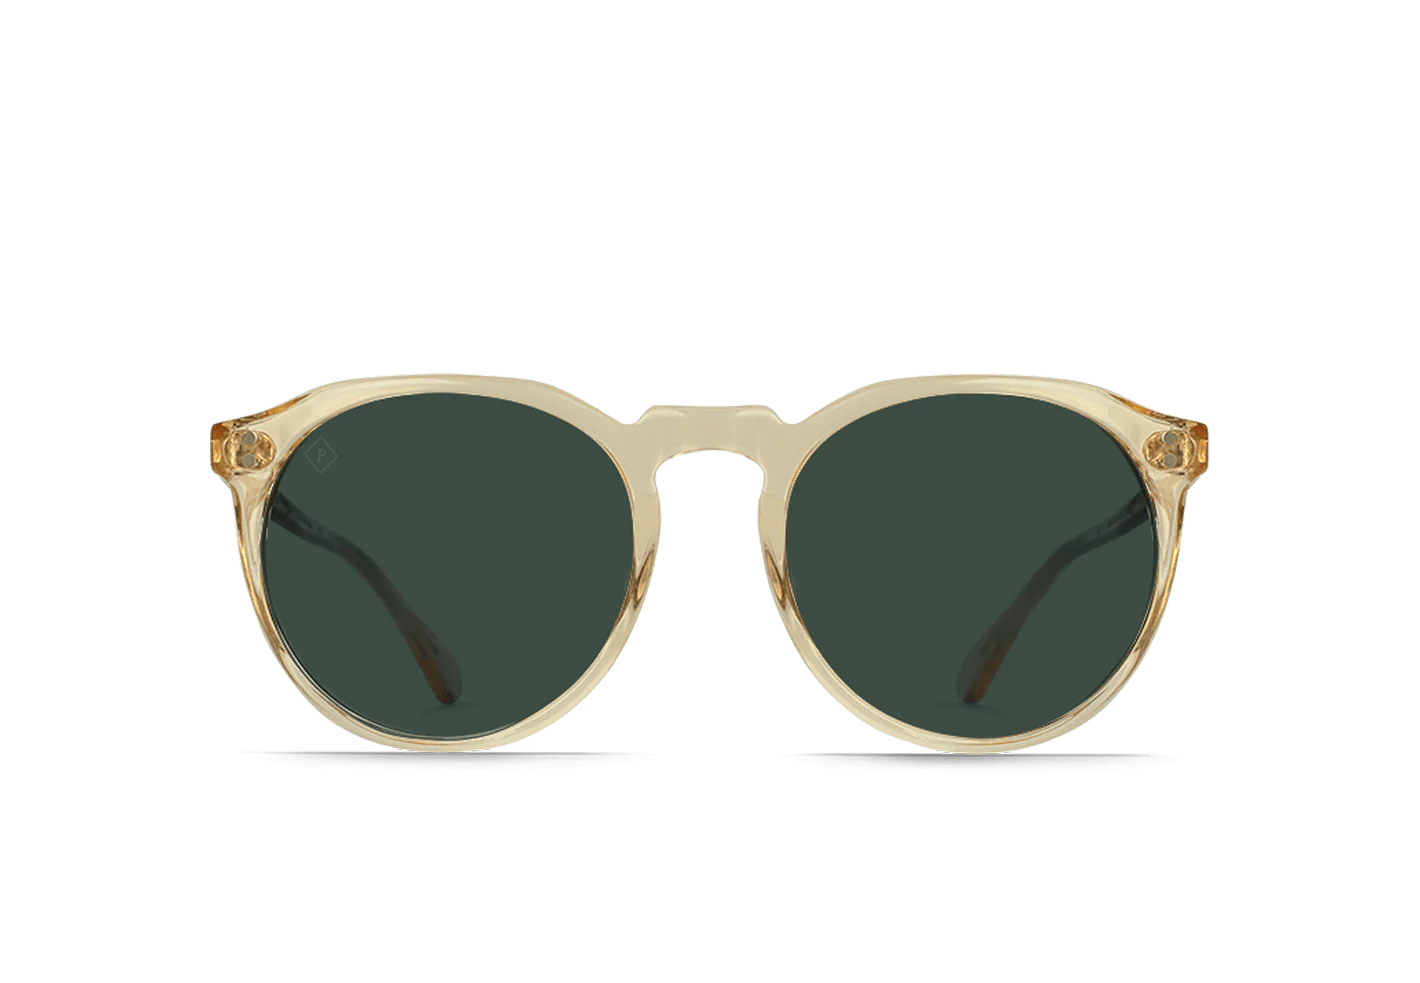 REMMY 52 SUNGLASSES - CHAMPAGNE CRYSTAL/GREEN POLARIZED